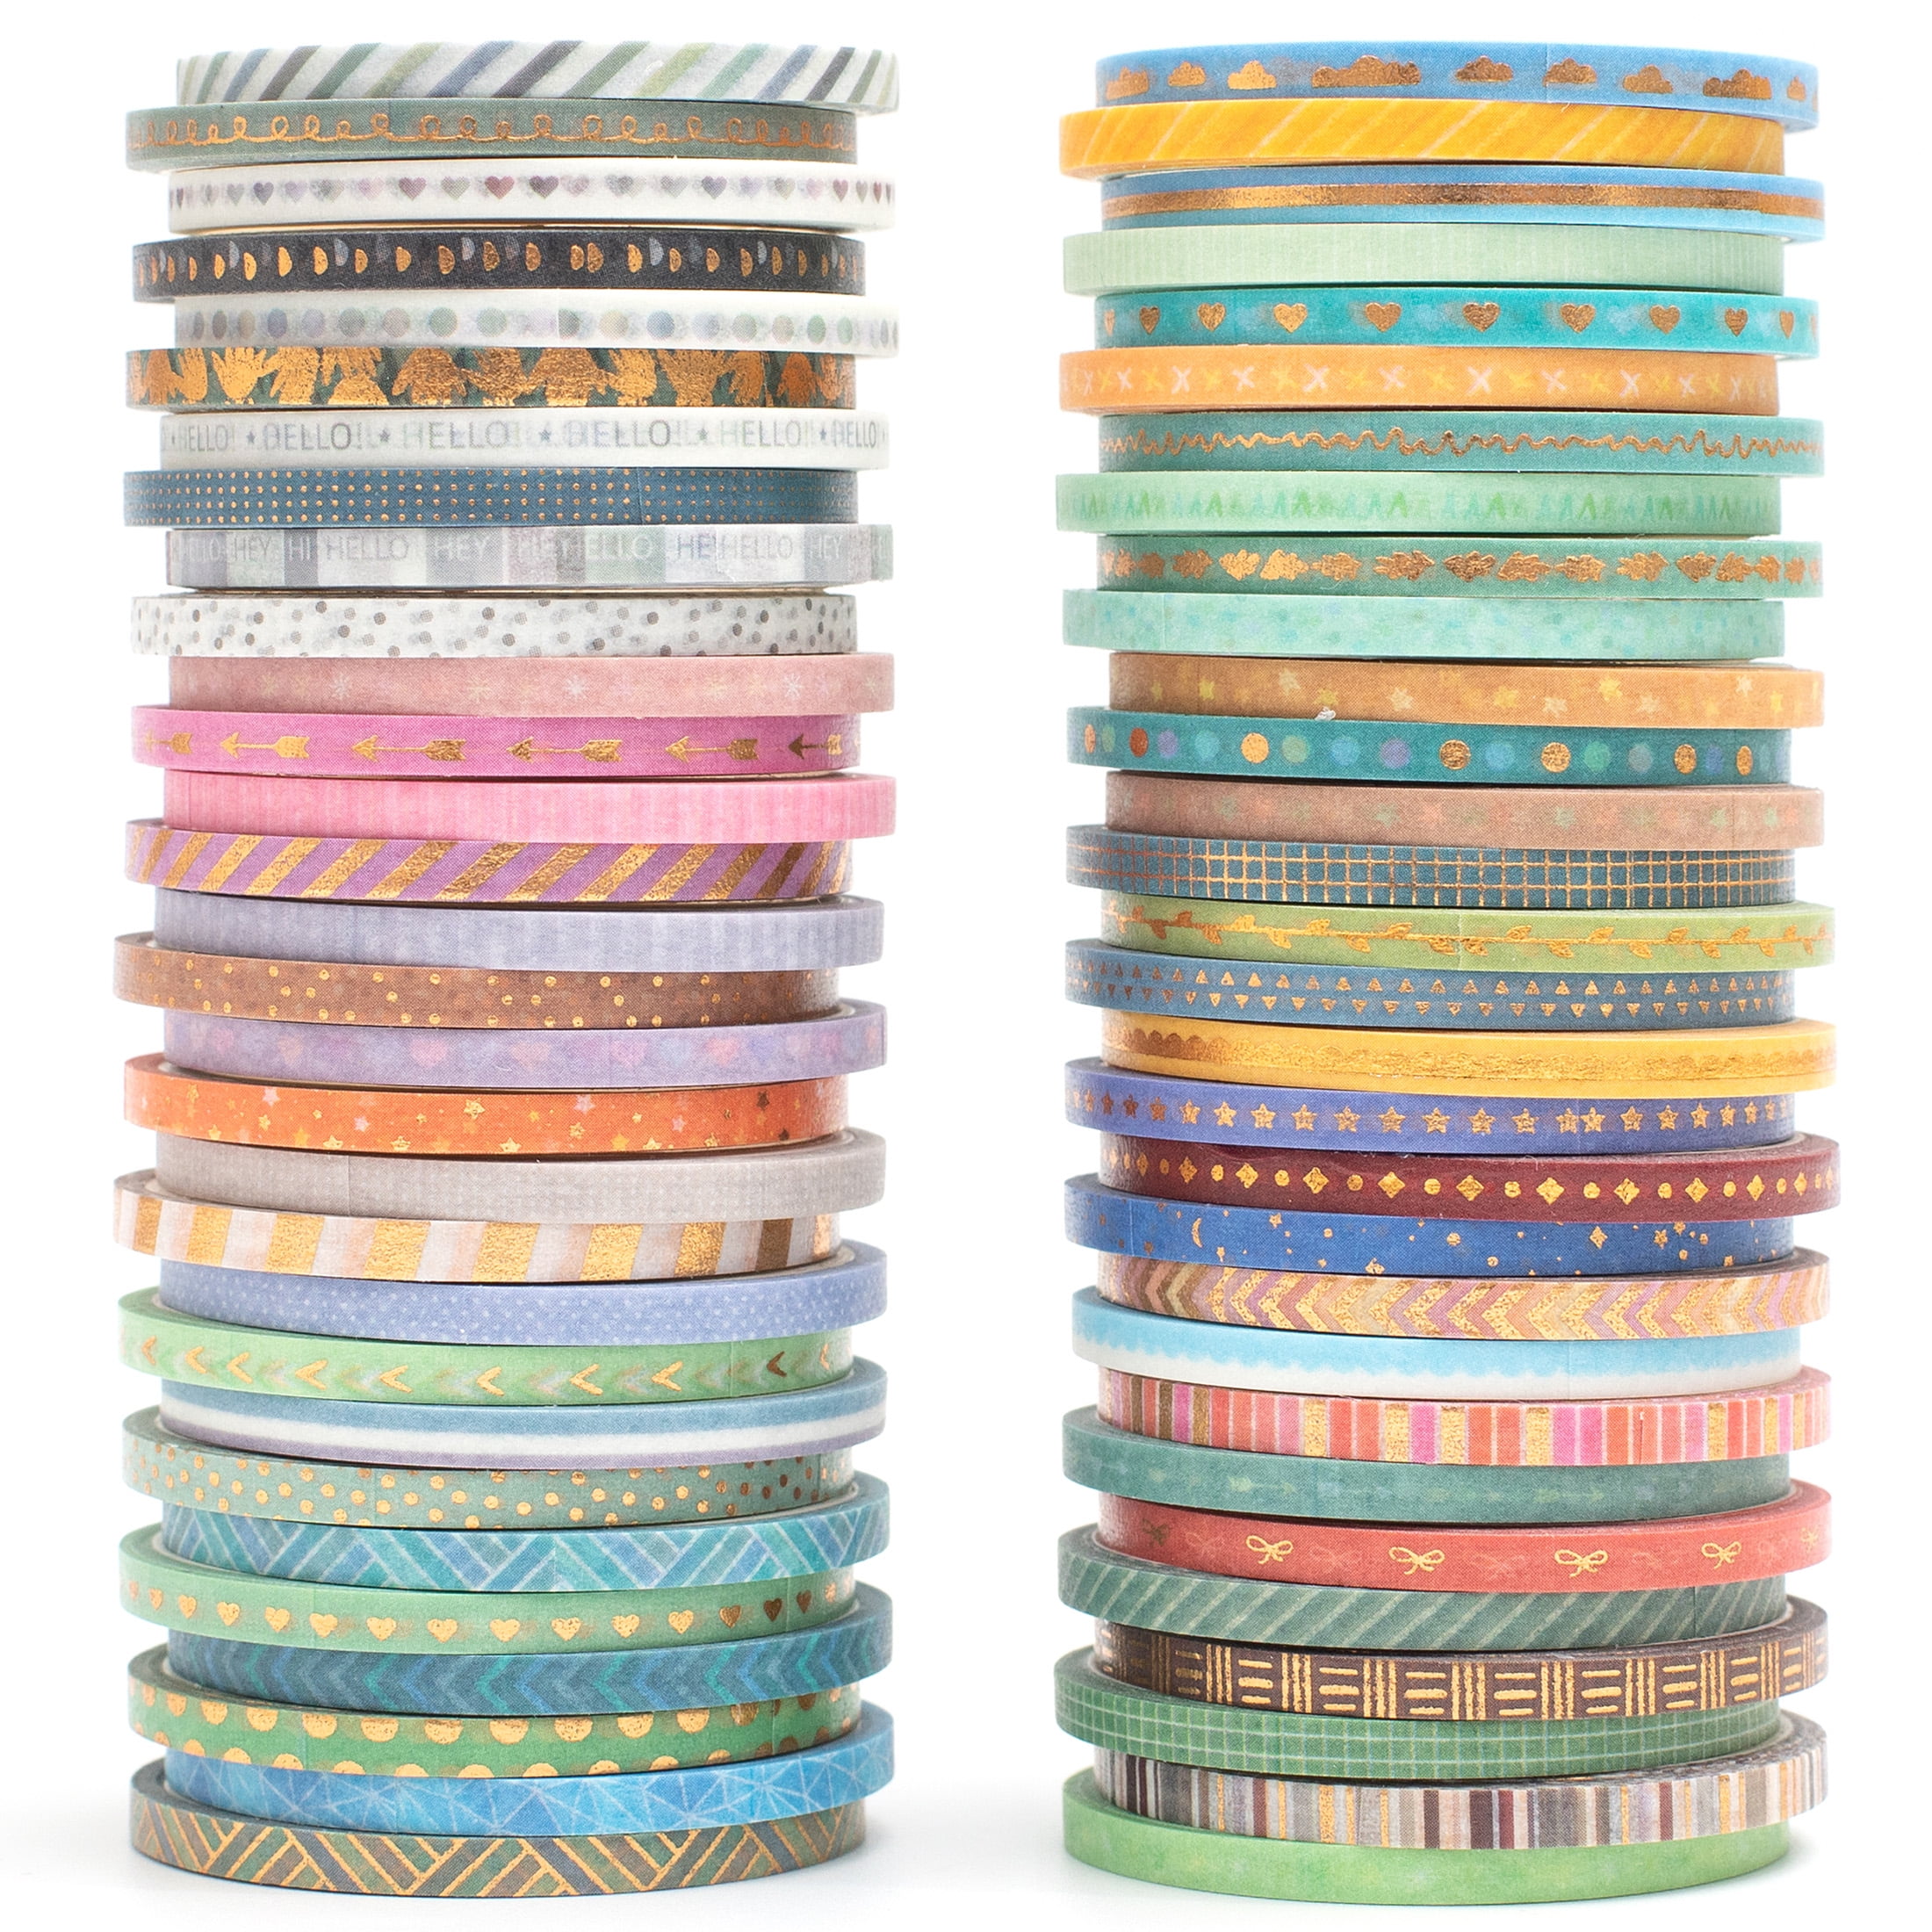  VEWINGL 60 Rolls Washi Tape Set,8 mm Wide Decorative Colored  Masking Tapes,Aesthetic for Scrapbooking,DIY Arts and Crafts, Bullet  Journal : Arts, Crafts & Sewing